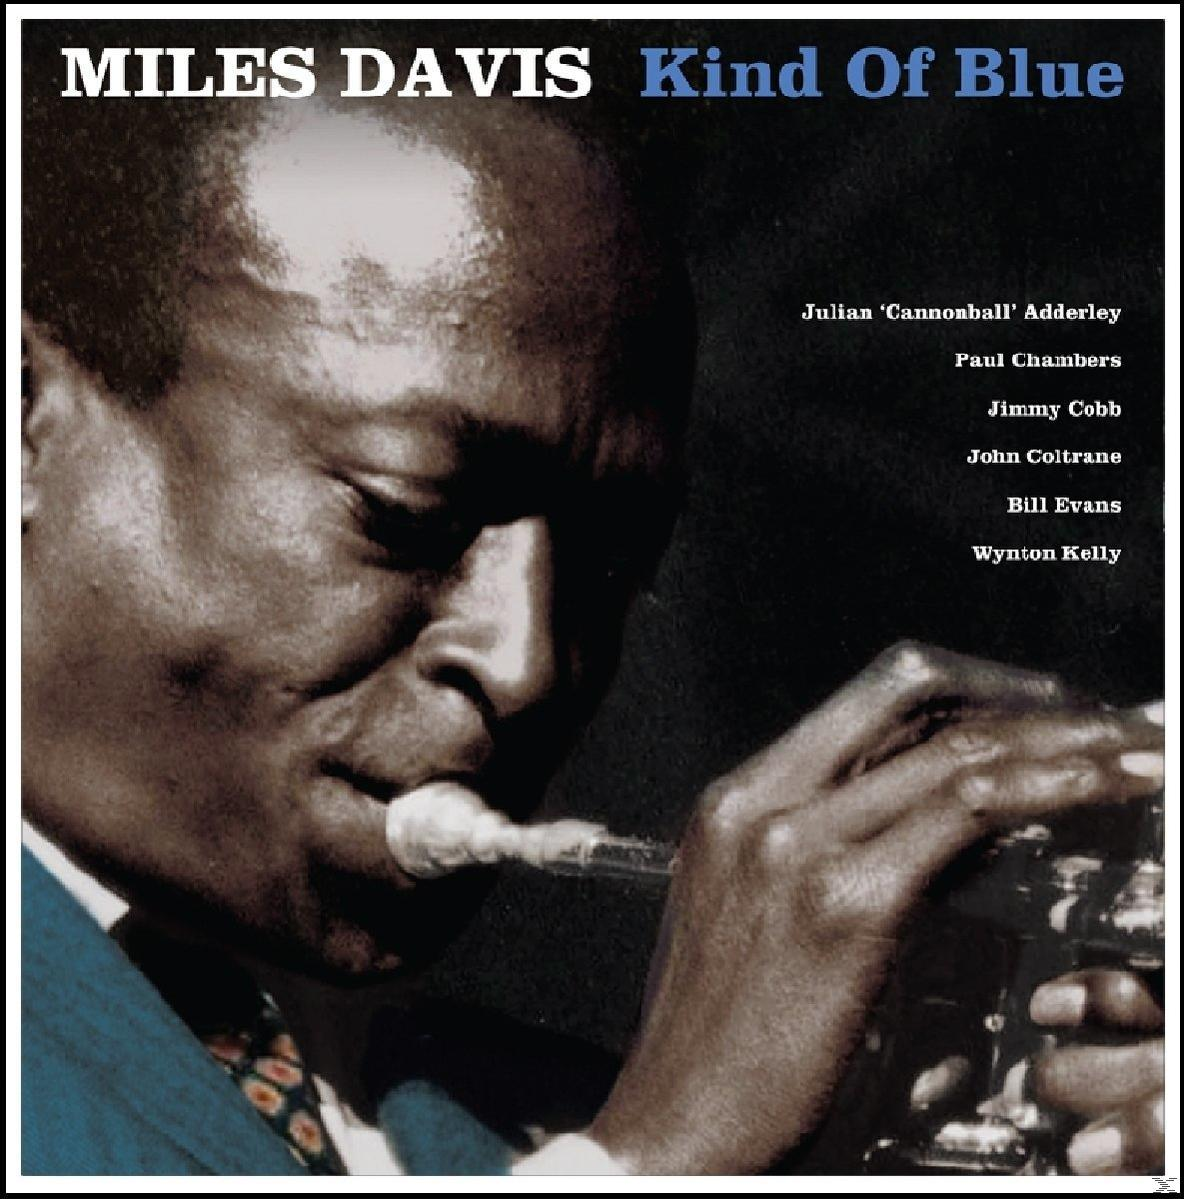 Davis (Vinyl) Miles At - Home With -